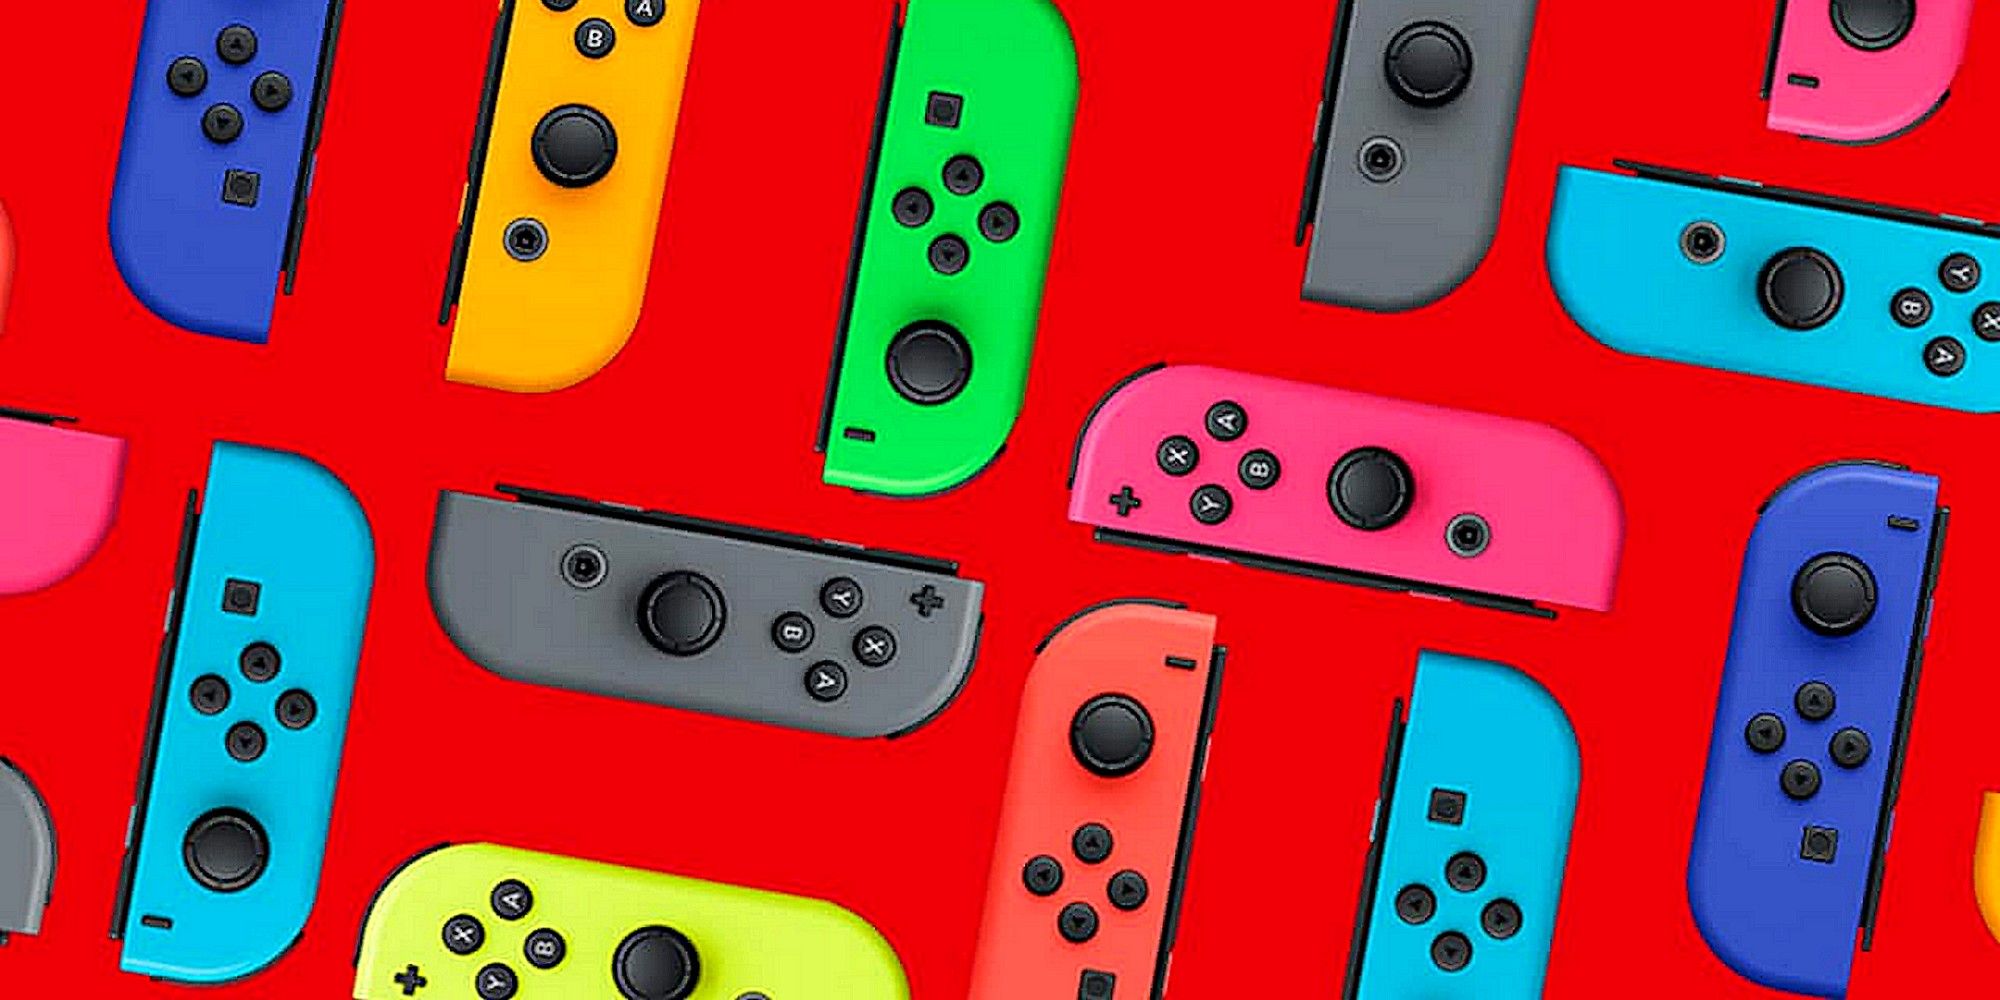 A selection of multicolor Joy-Cons for Nintendo Switch against a red background